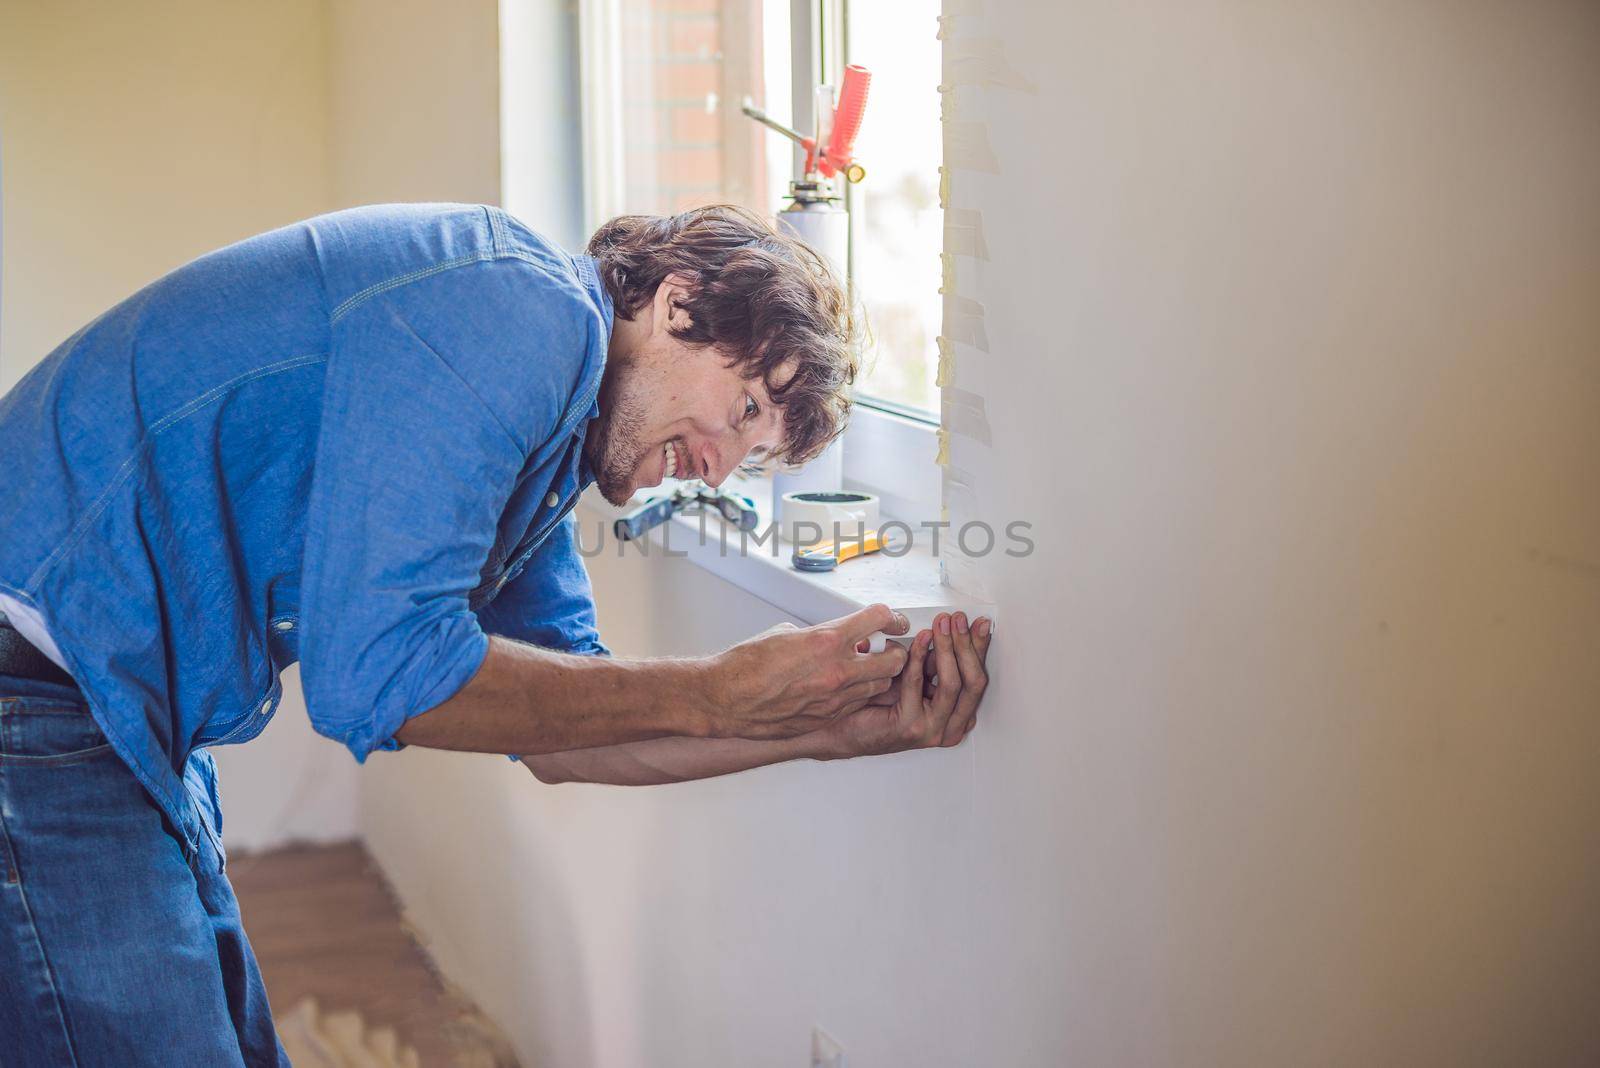 Man in a blue shirt does window installation.